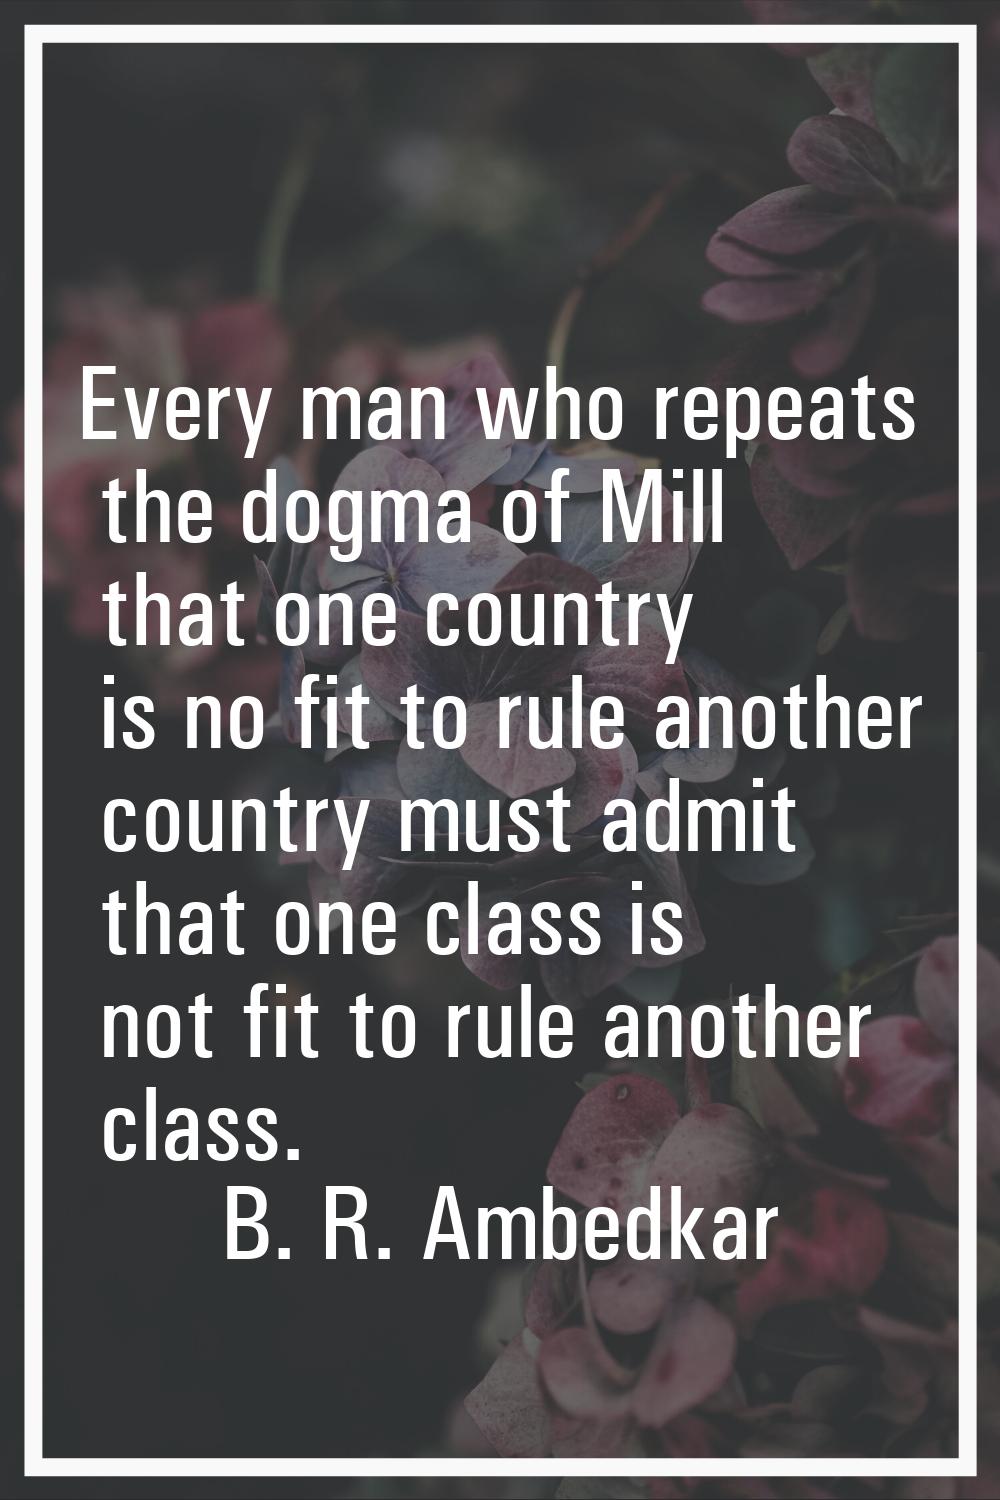 Every man who repeats the dogma of Mill that one country is no fit to rule another country must adm